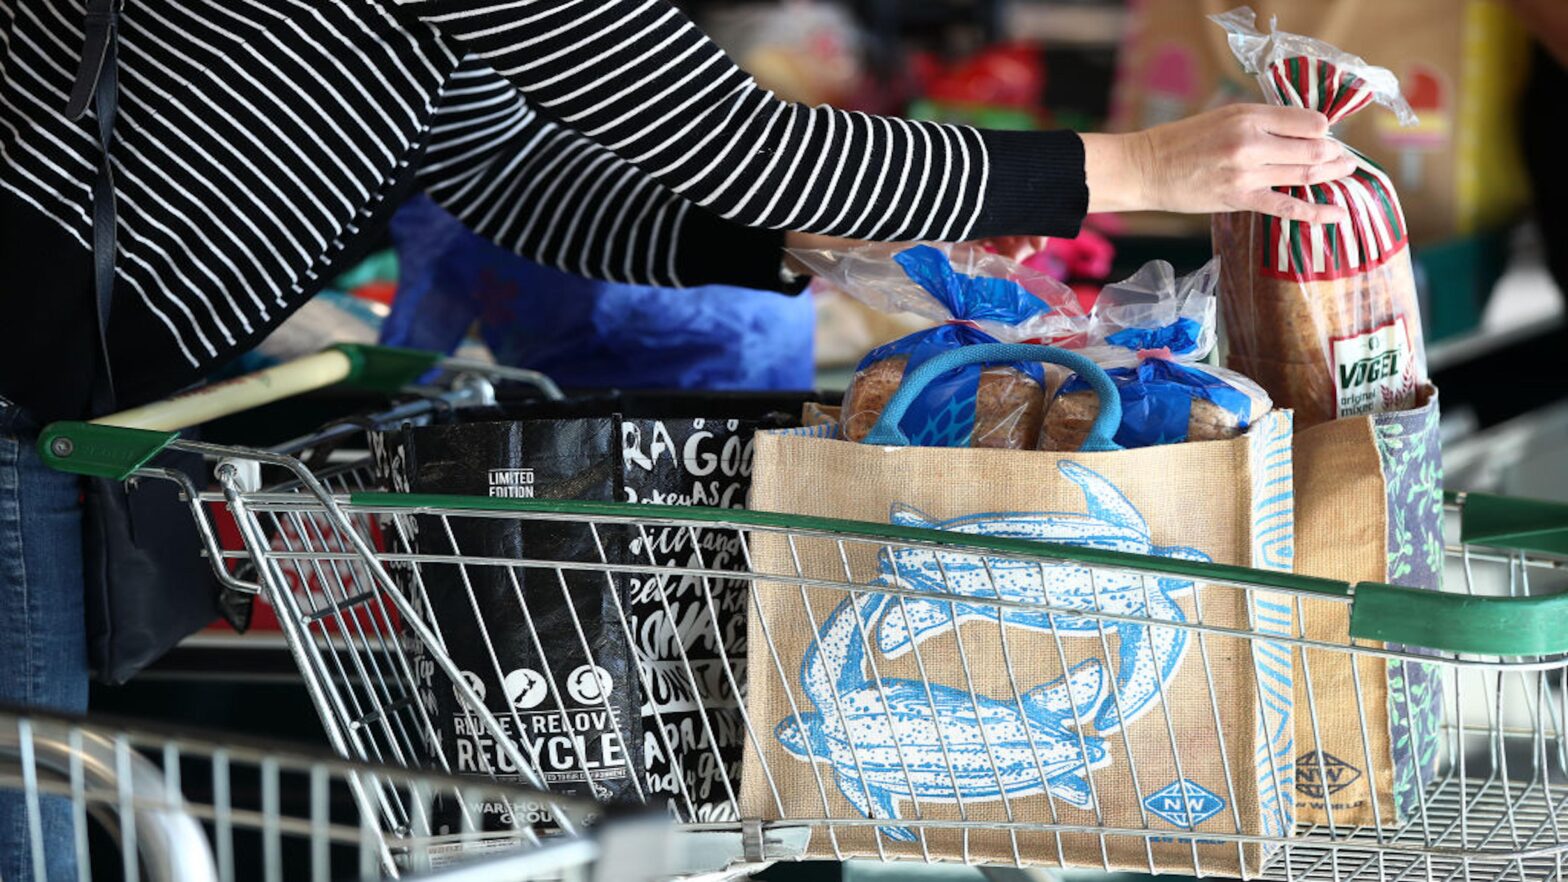 Reusable bags being packed at a supermarket in New Zealand.